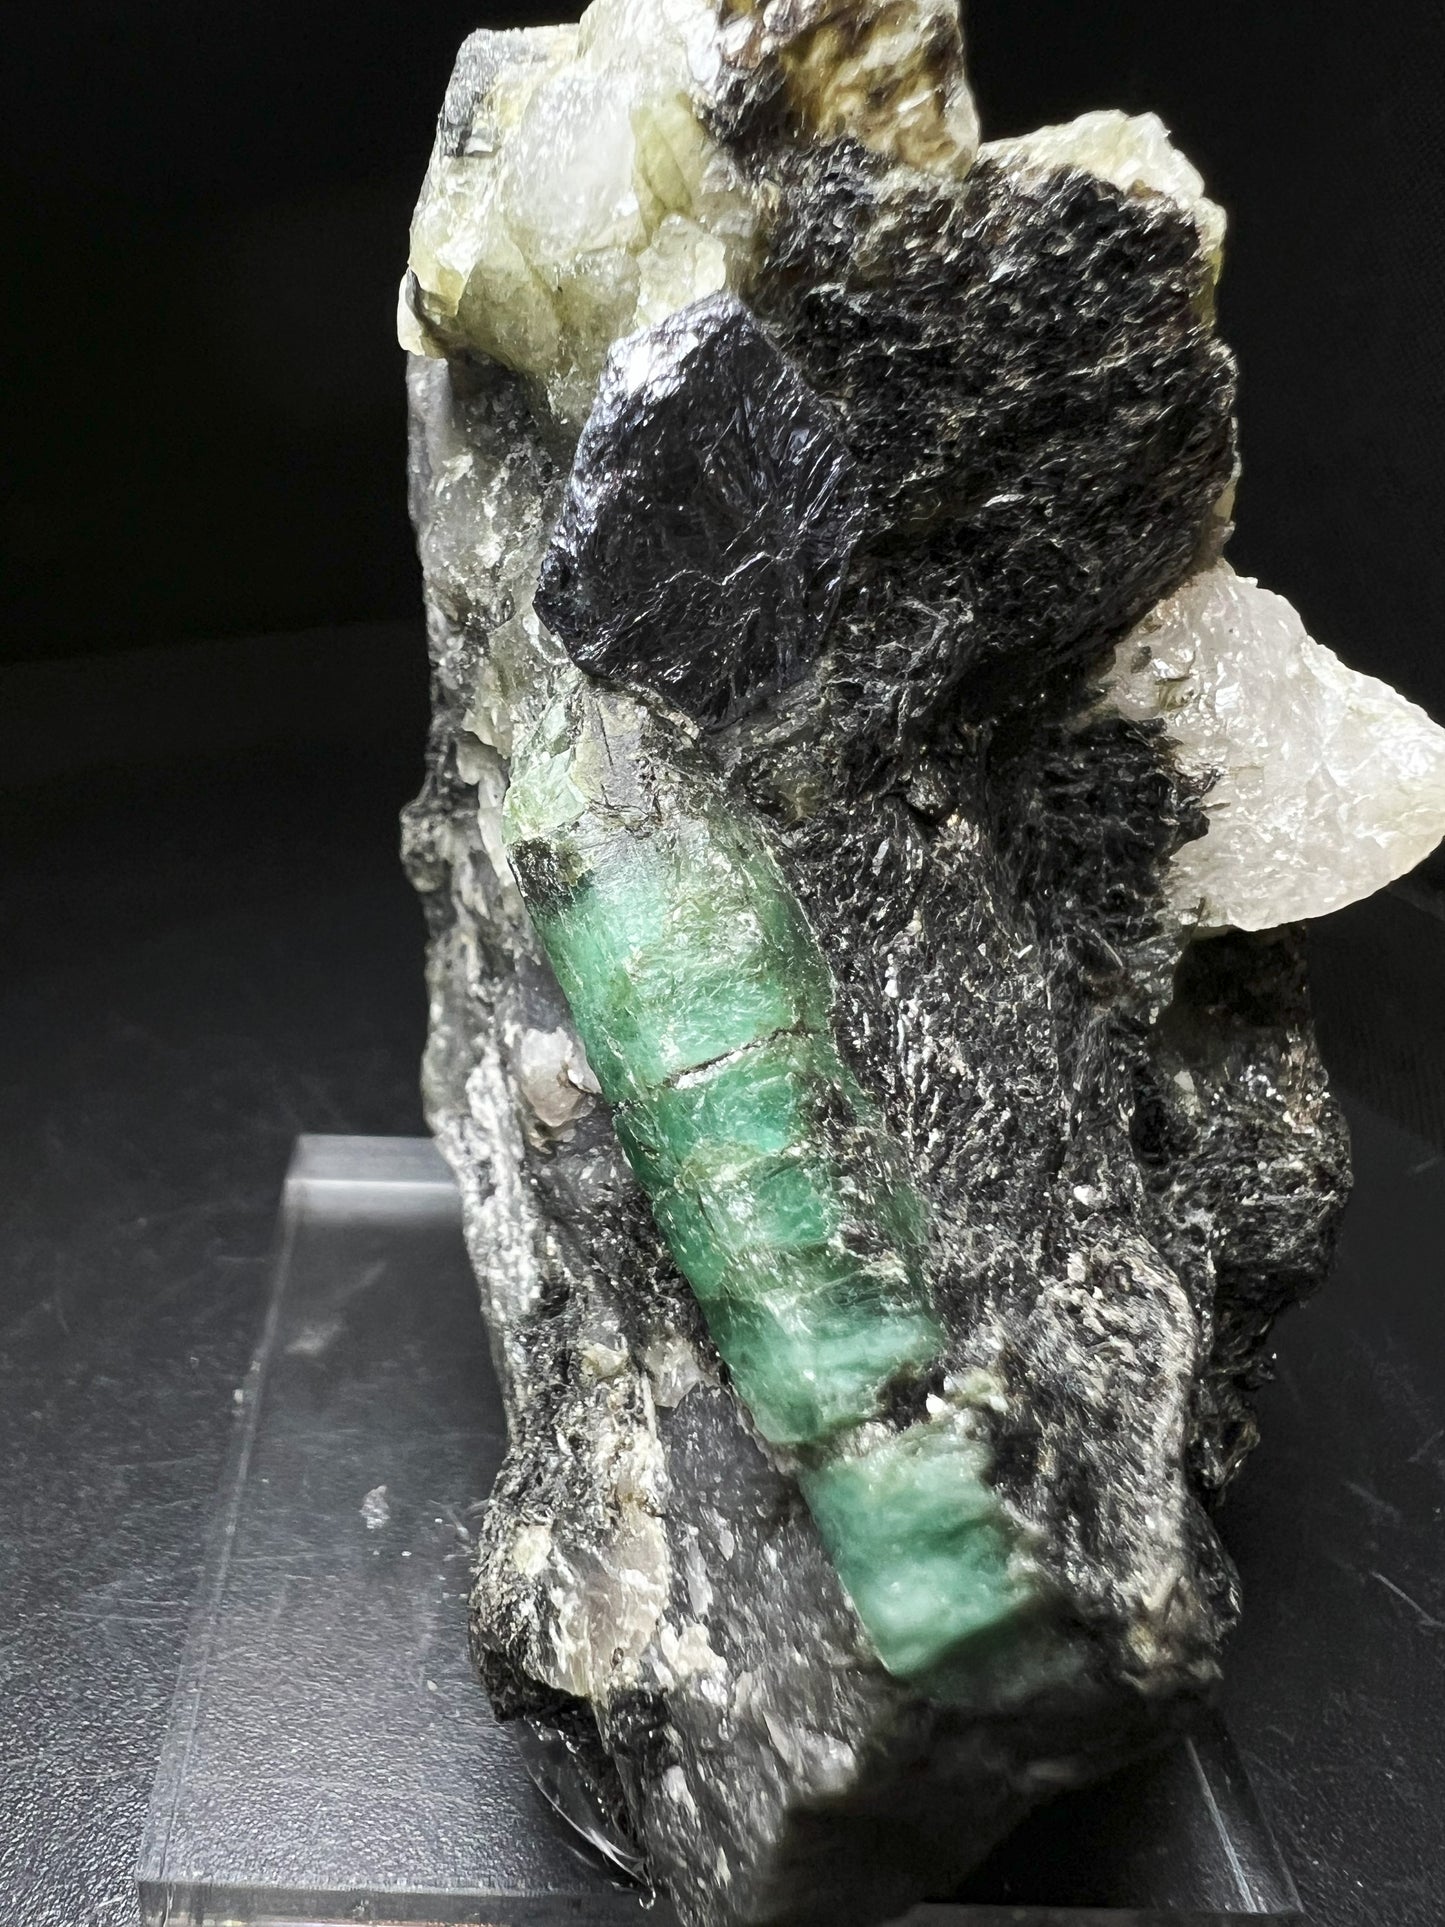 Rare Perfect Formation of Beryl Var Emerald With A Perfect Molybdenite Formation on Matrix From Carnaíba mining district, Pindobaçu, Bahia, Brazil